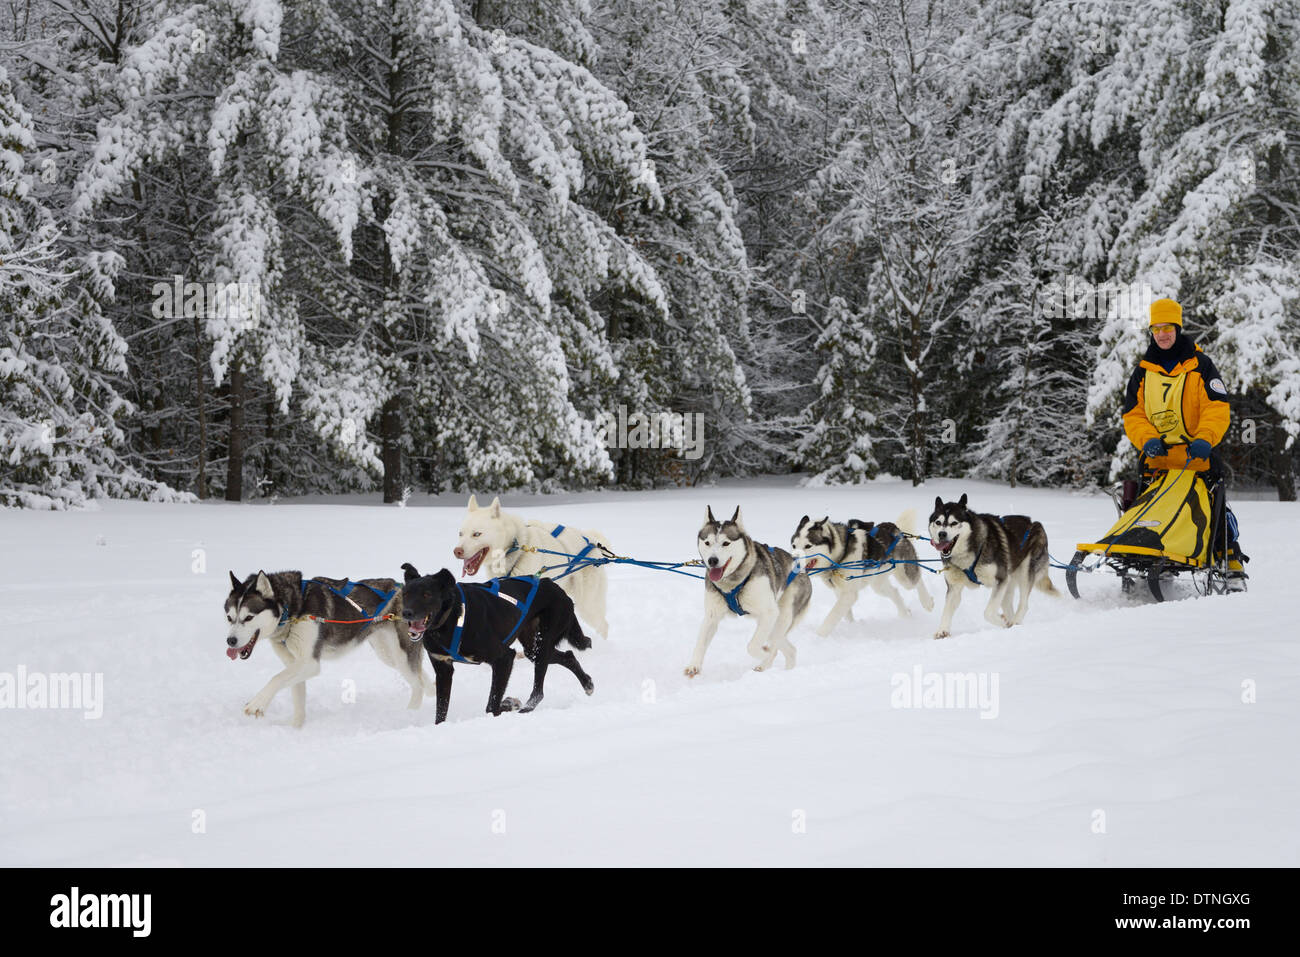 Male musher with Huskies exiting snowy forest on six dog sled event at Marmora Snofest Ontario Canada with snow covered evergreen trees Stock Photo